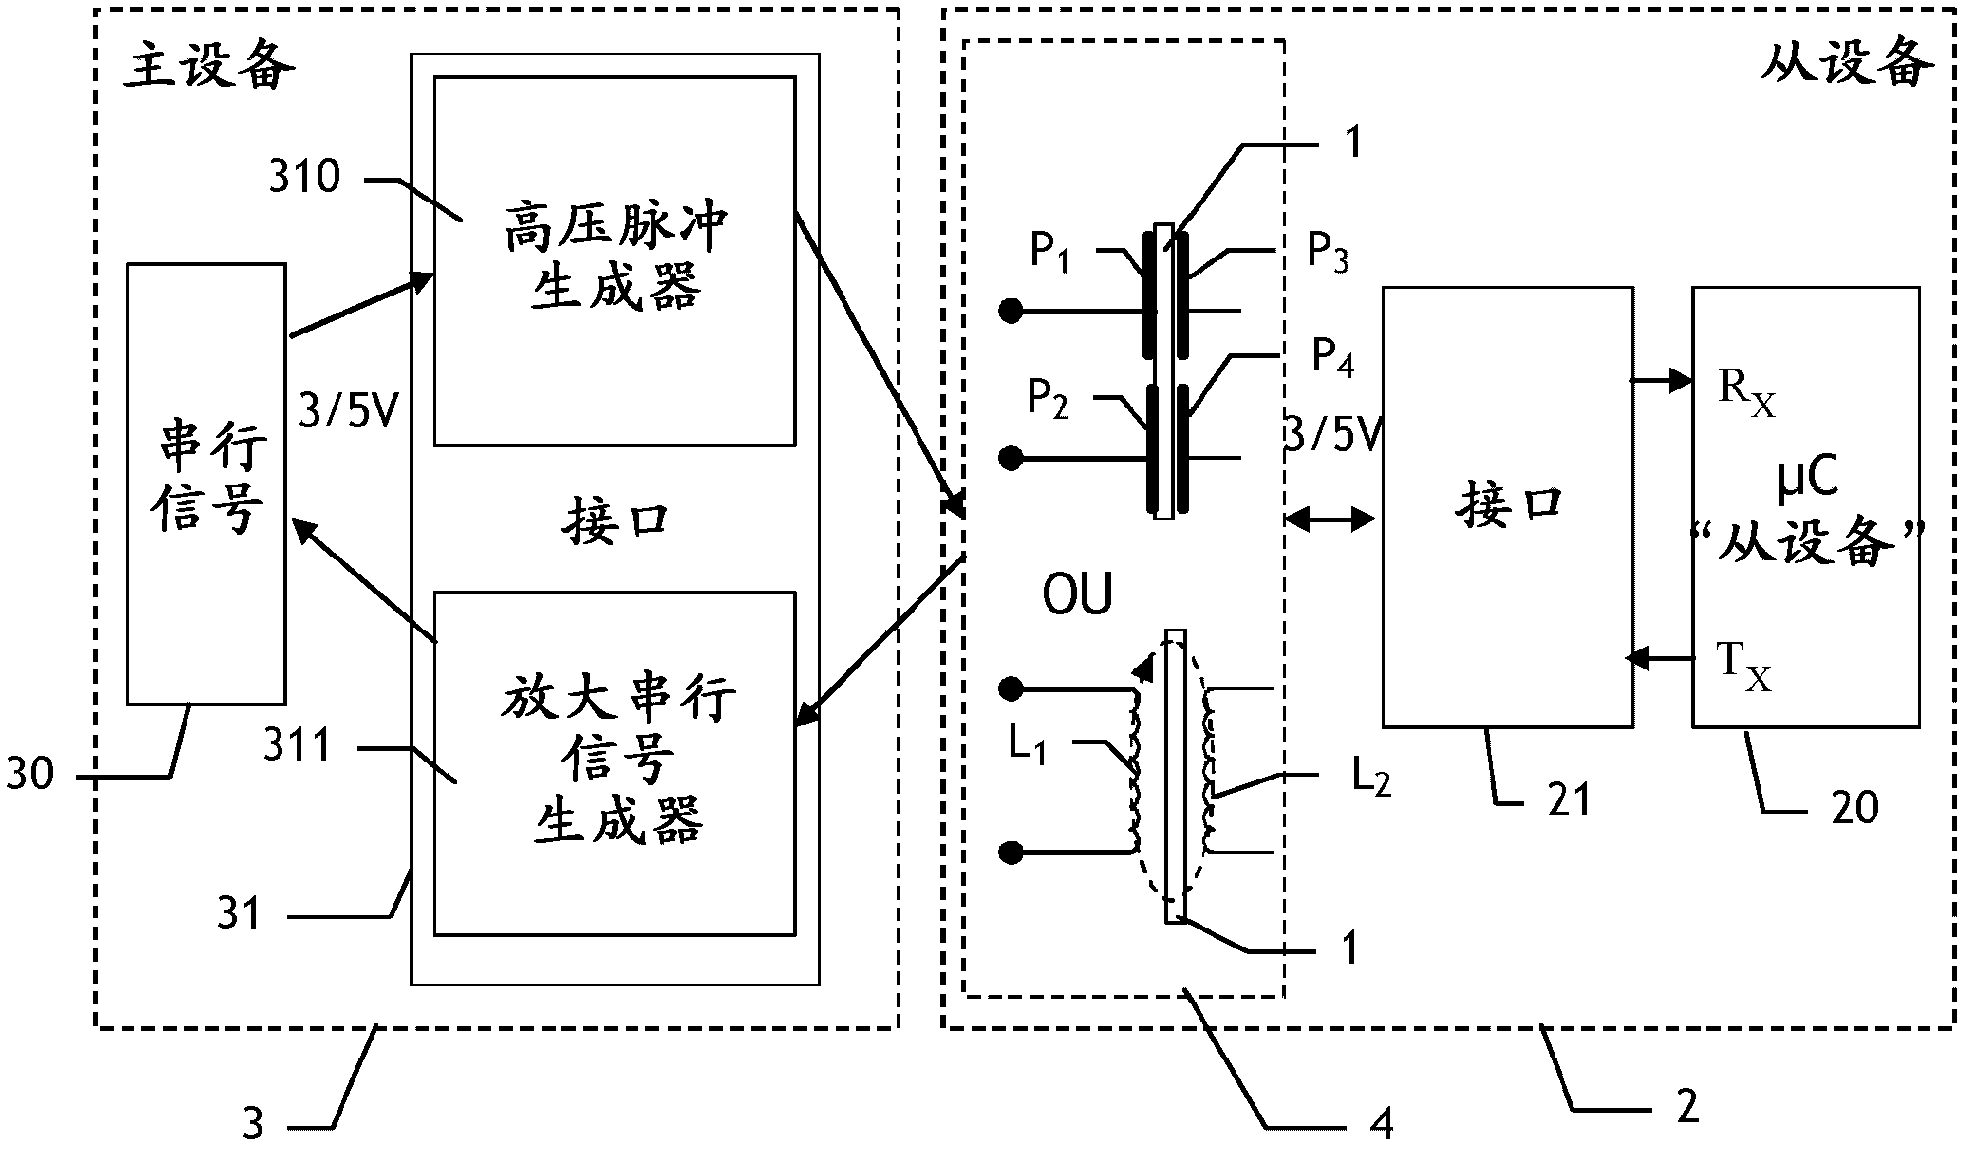 Wireless two-way transmission of serial data signals between an electronic device and a power meter